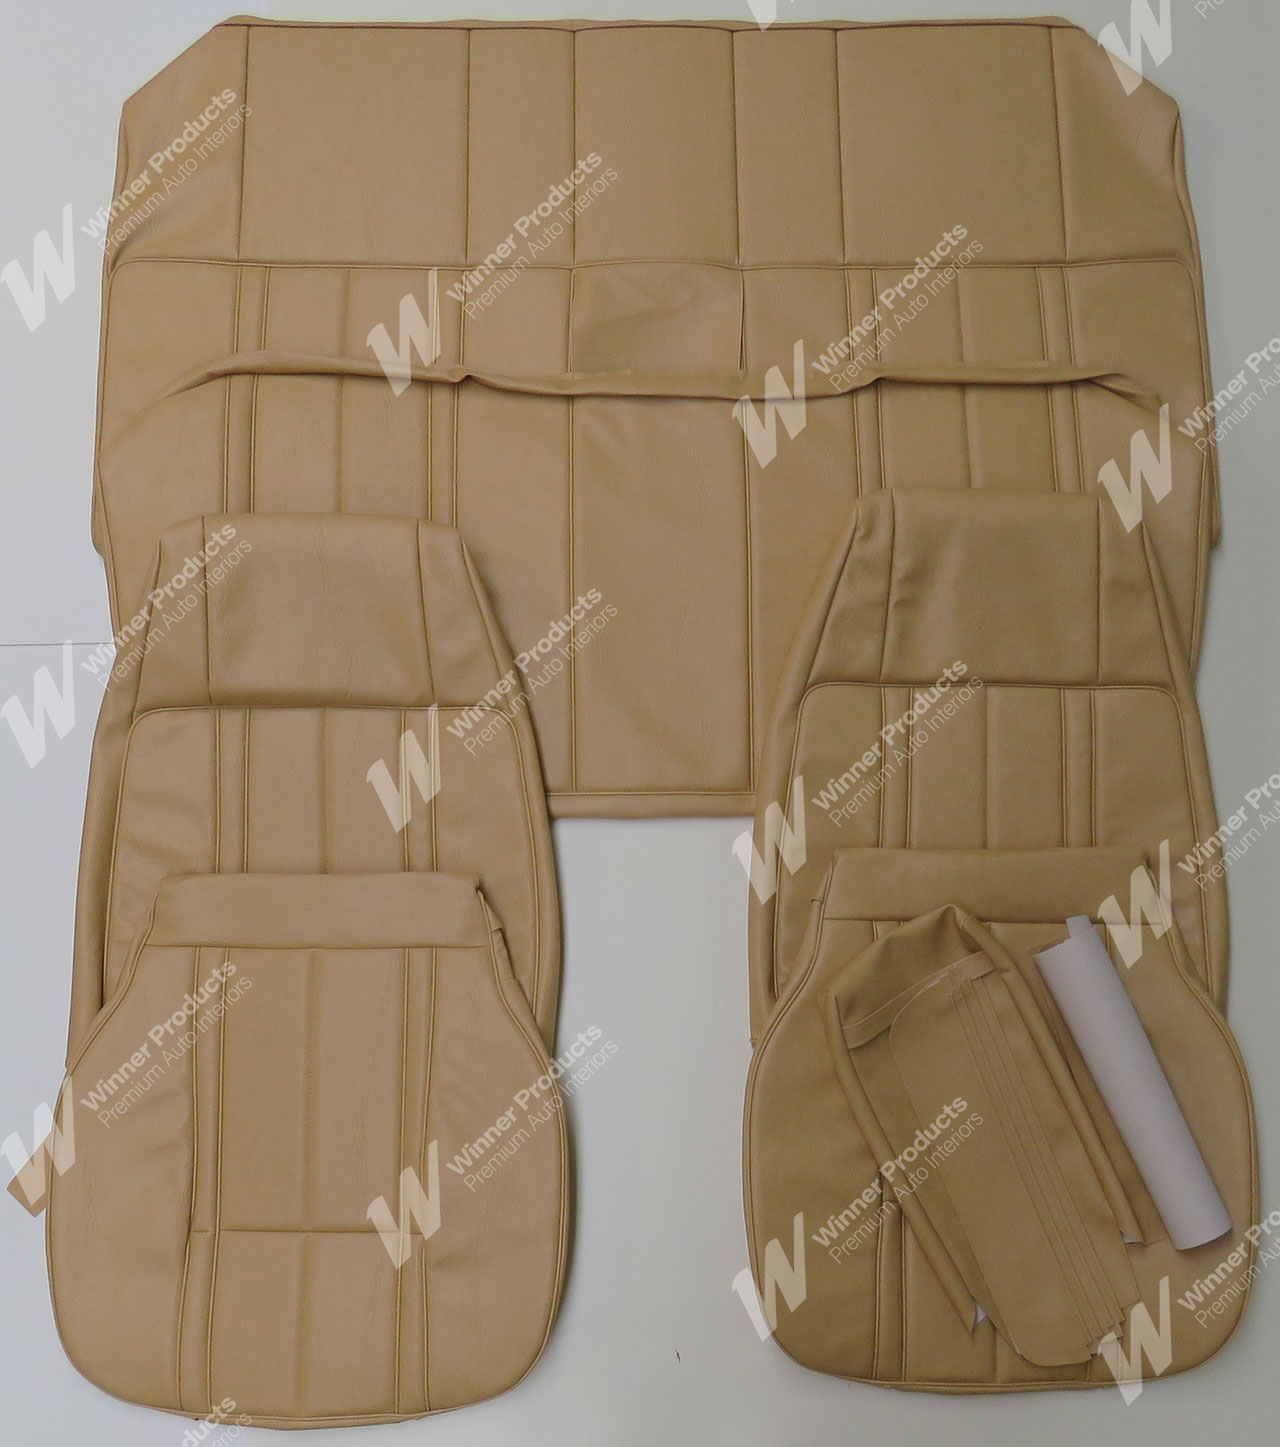 Ford GT XB GT Sedan C Chamois Seat Covers (Image 1 of 7)